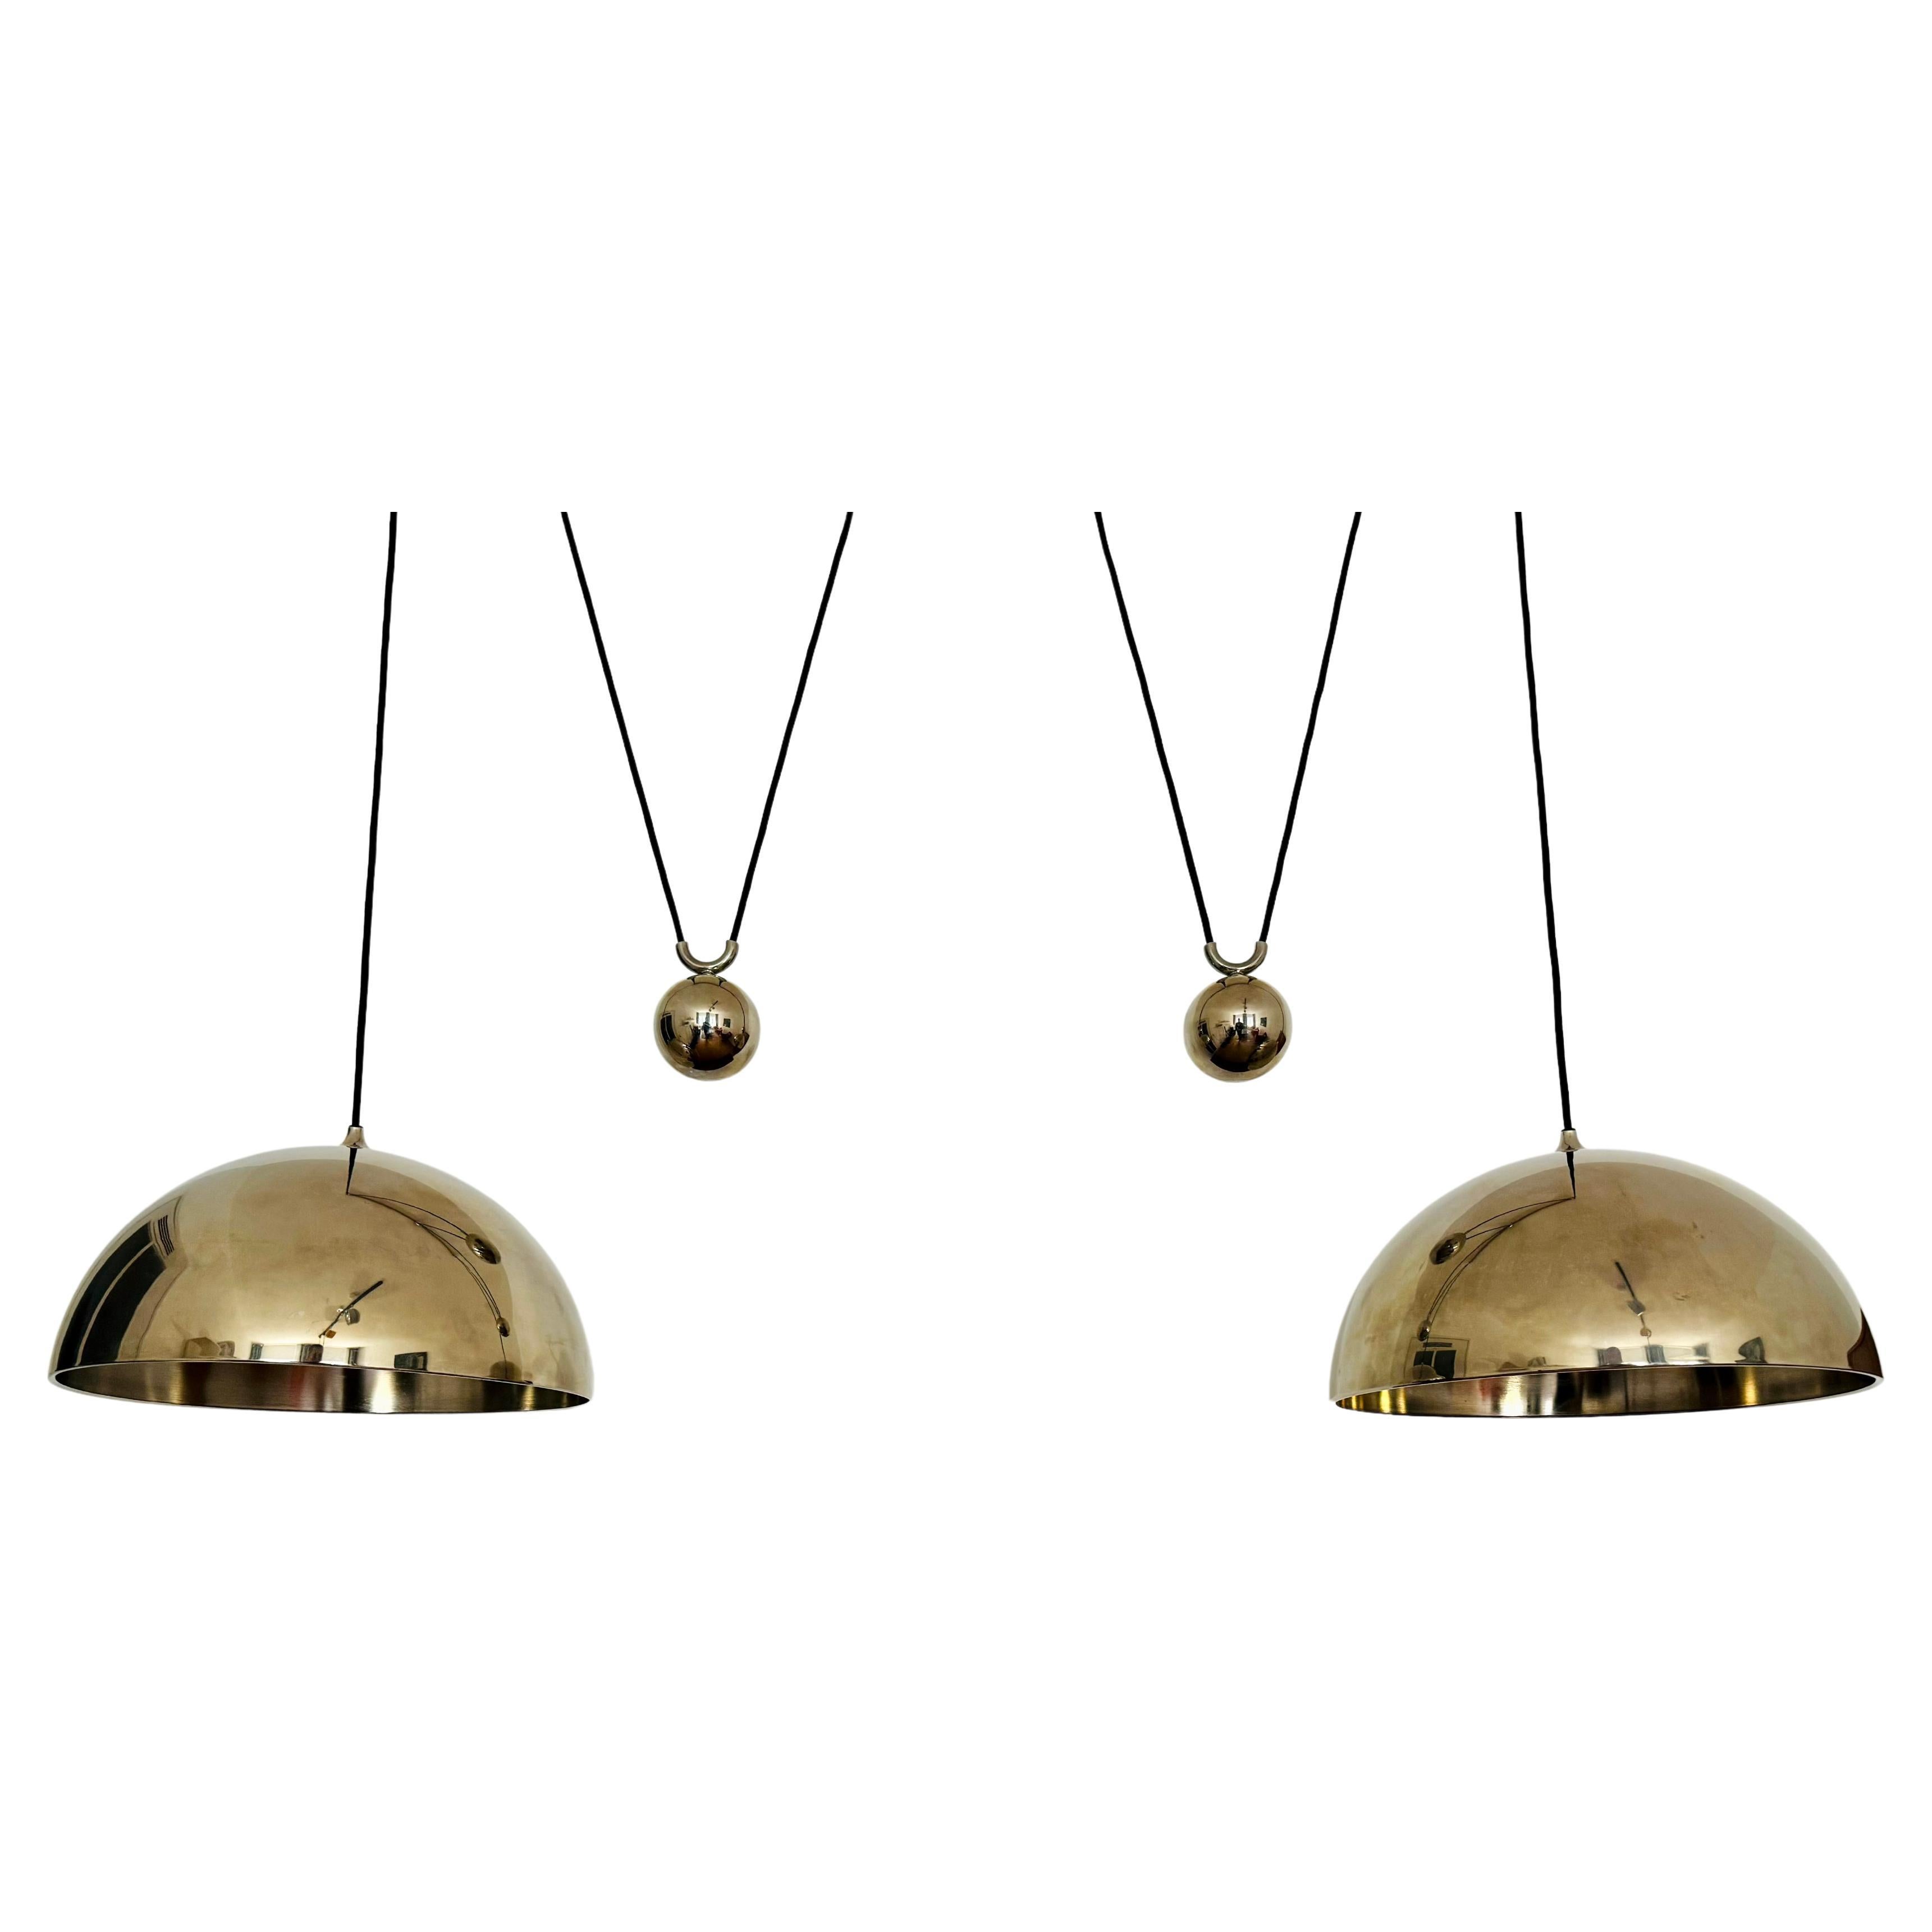 Large Adjustable Double Posa40 Nickel Plated Pendant Lamp by Florian Schulz  For Sale